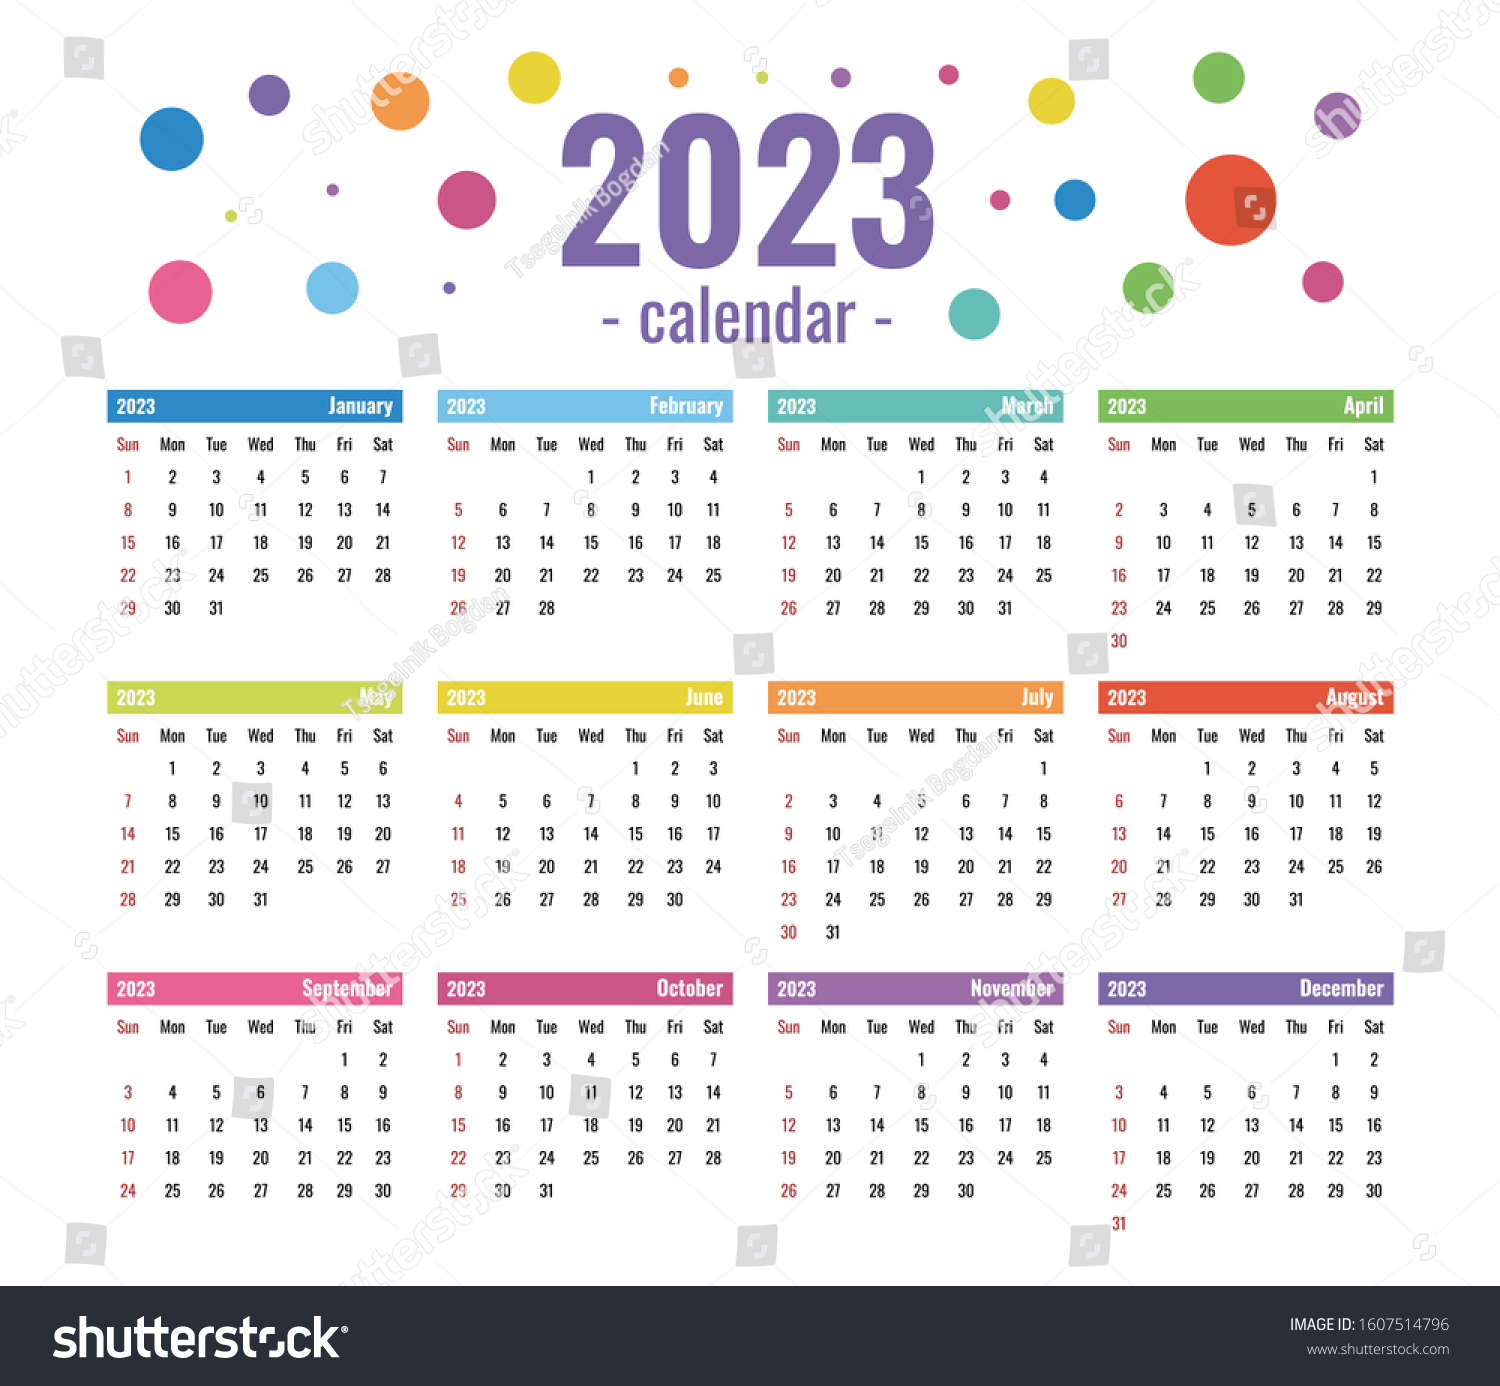 2023 Yearly Calendar With Holidays